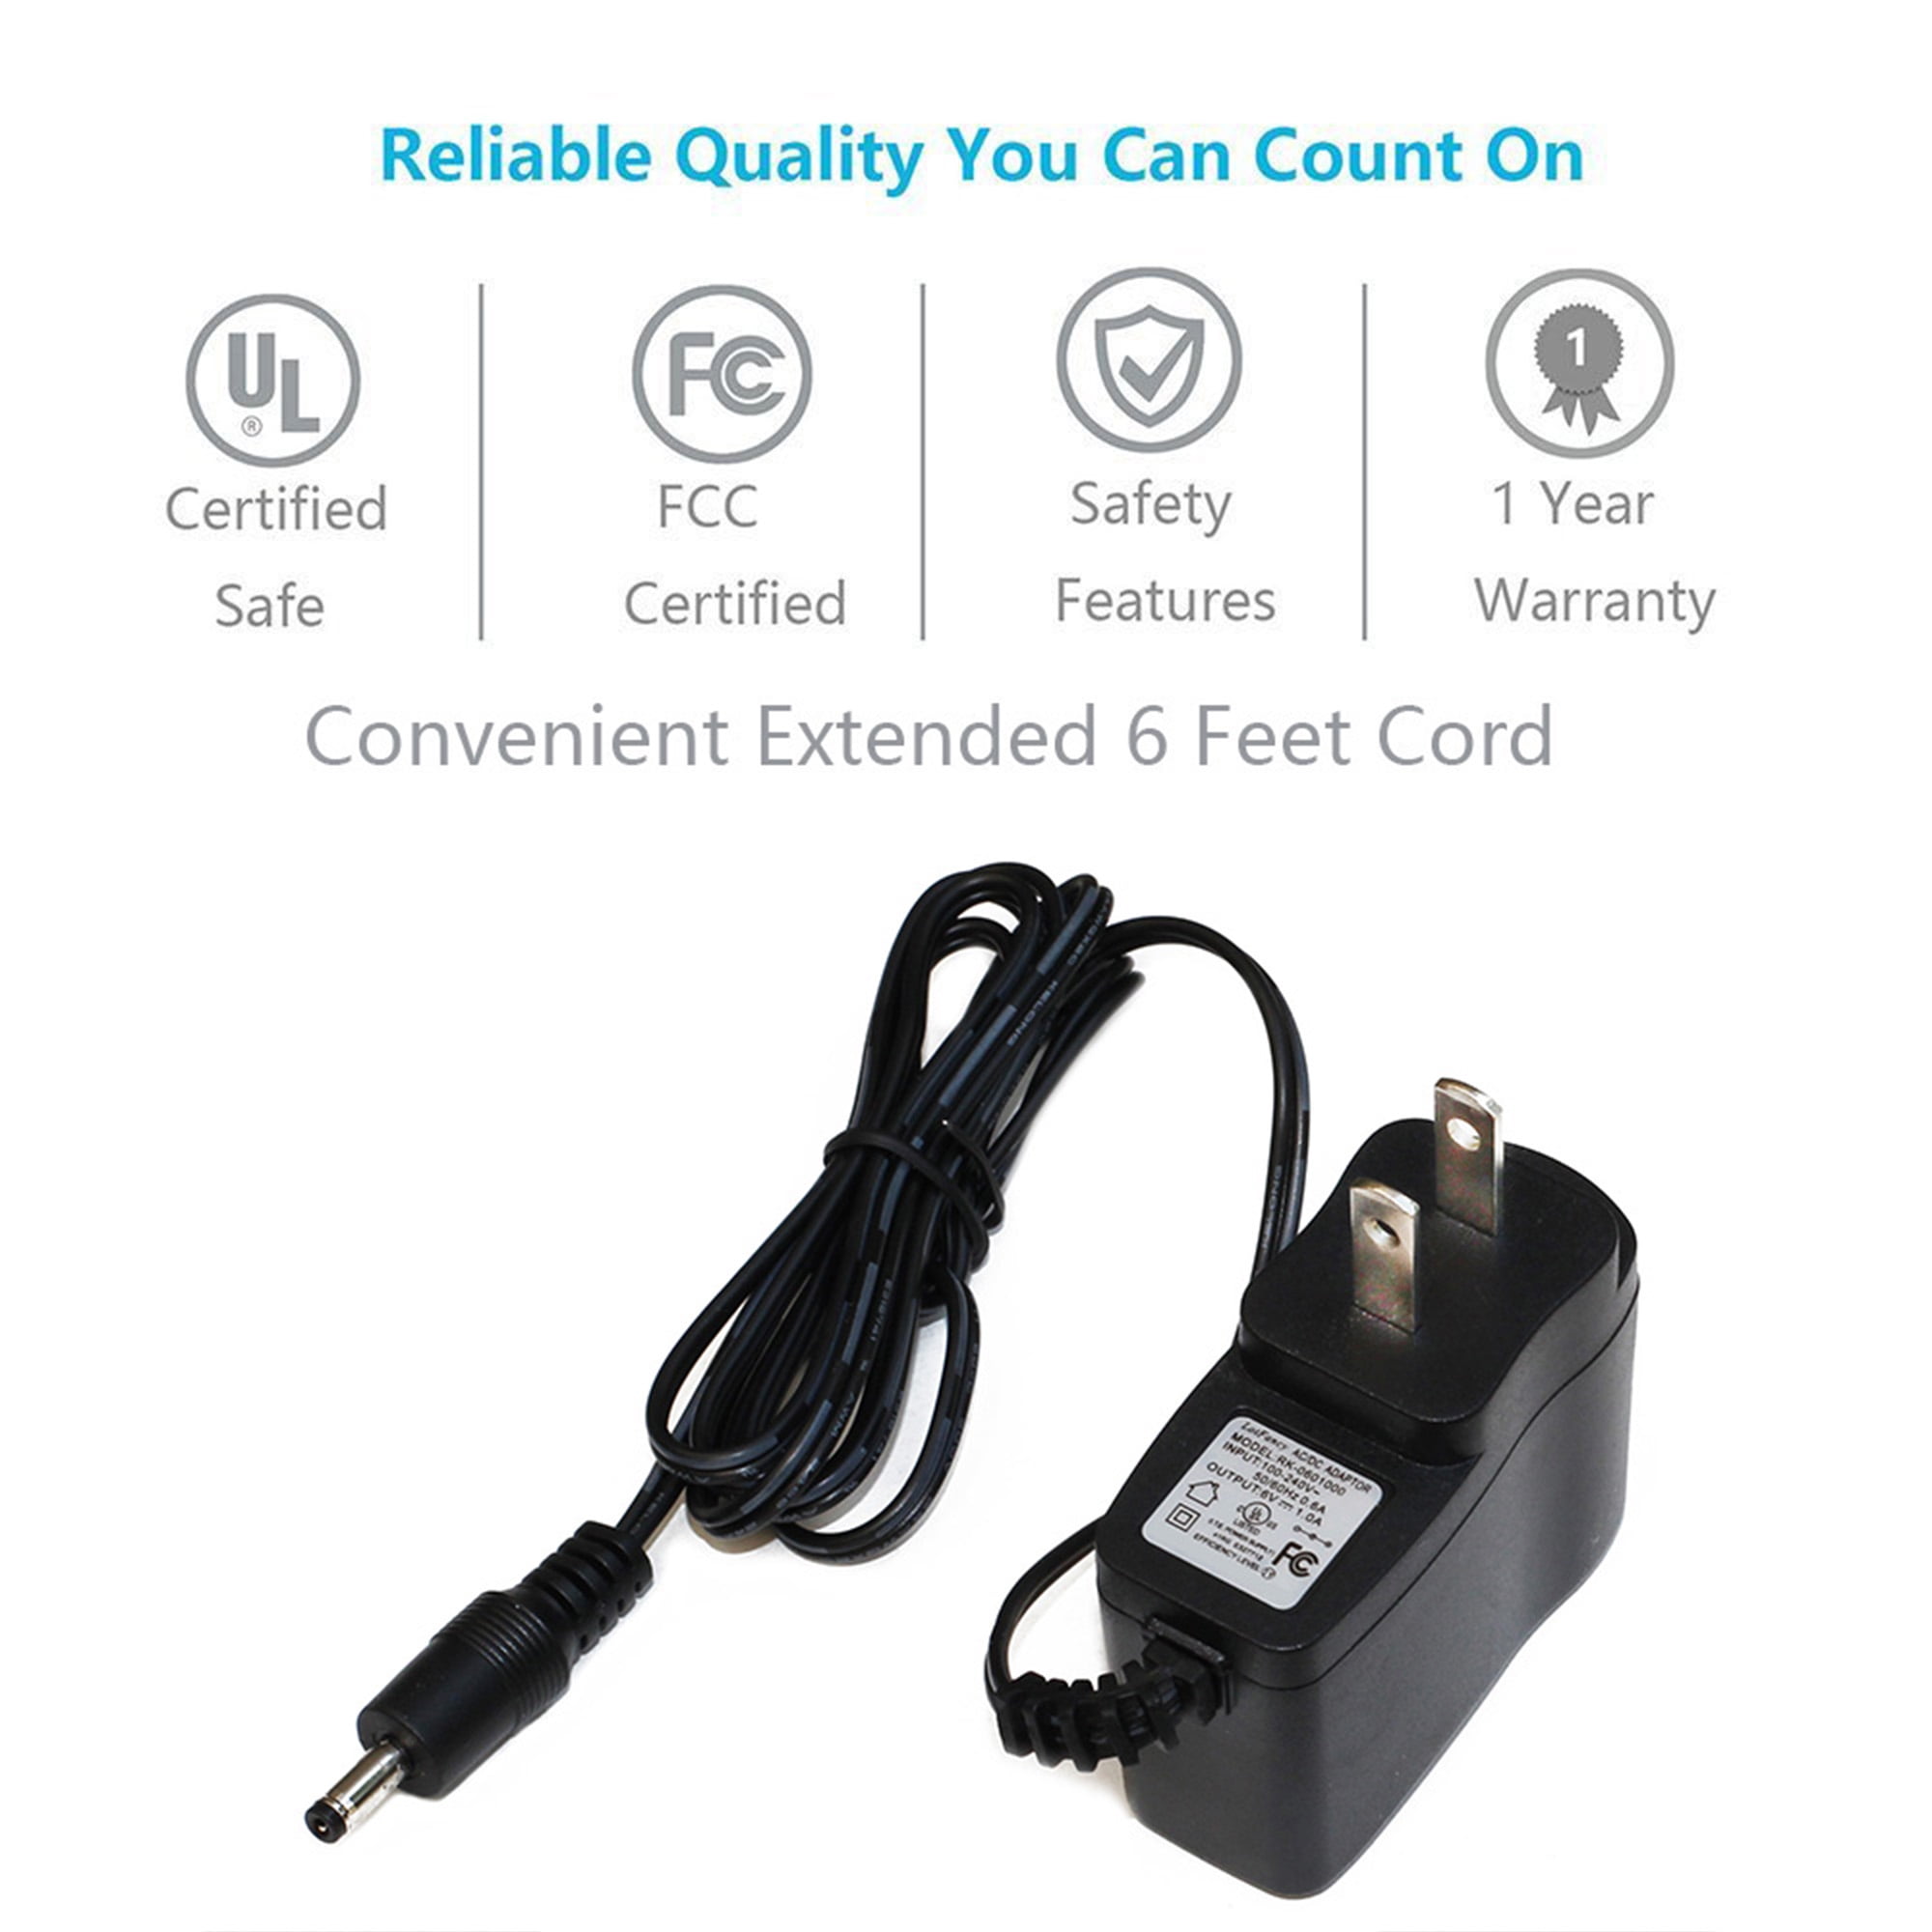 AC Power Adapter for Omron Healthcare / BP Series Blood Pressure Monitor,  ADPT1